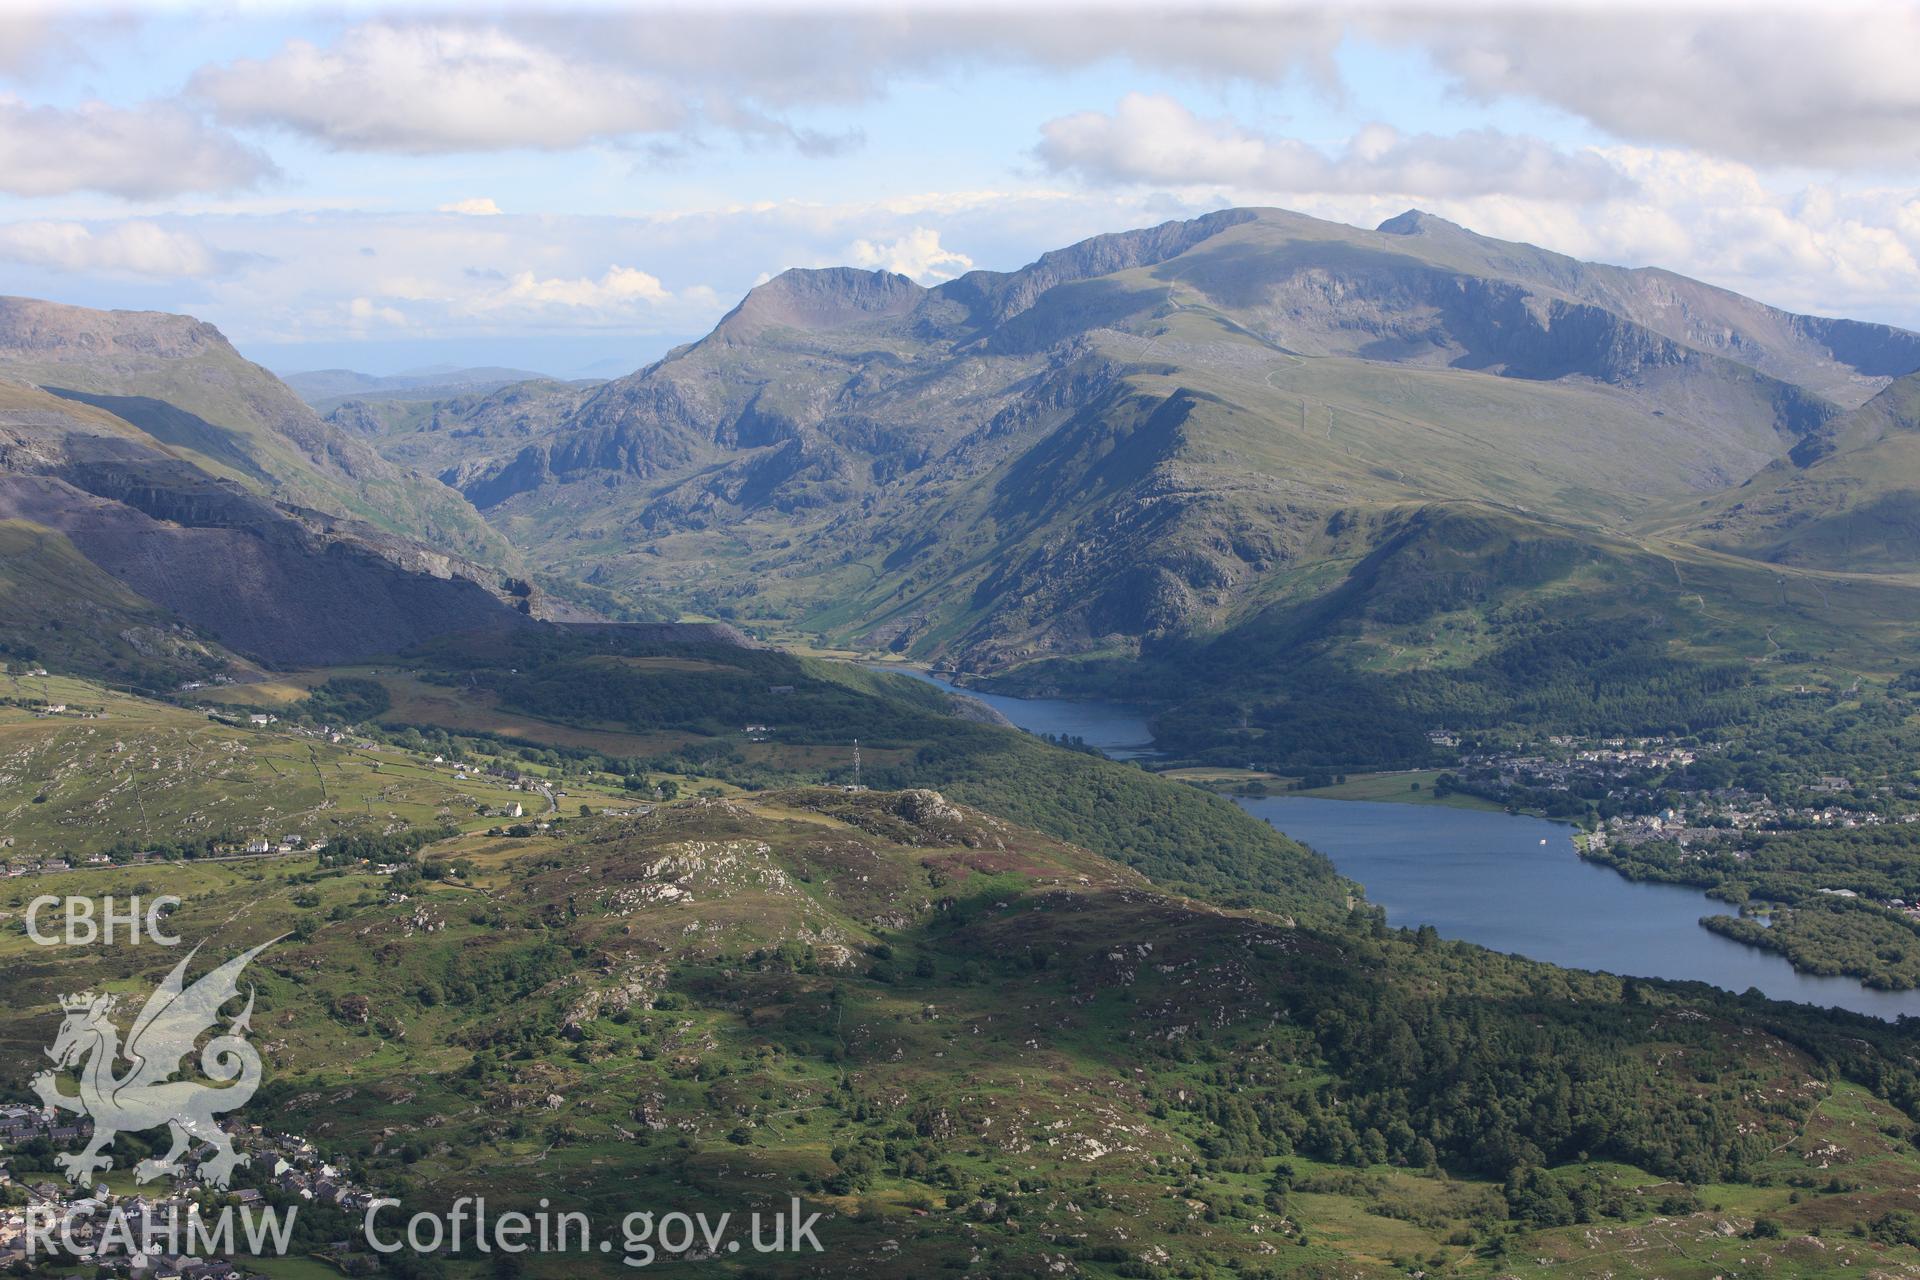 RCAHMW colour oblique photograph of Llanberis, Llyn Padarn and Snowdon. Landscape from the north-west. Taken by Toby Driver on 20/07/2011.